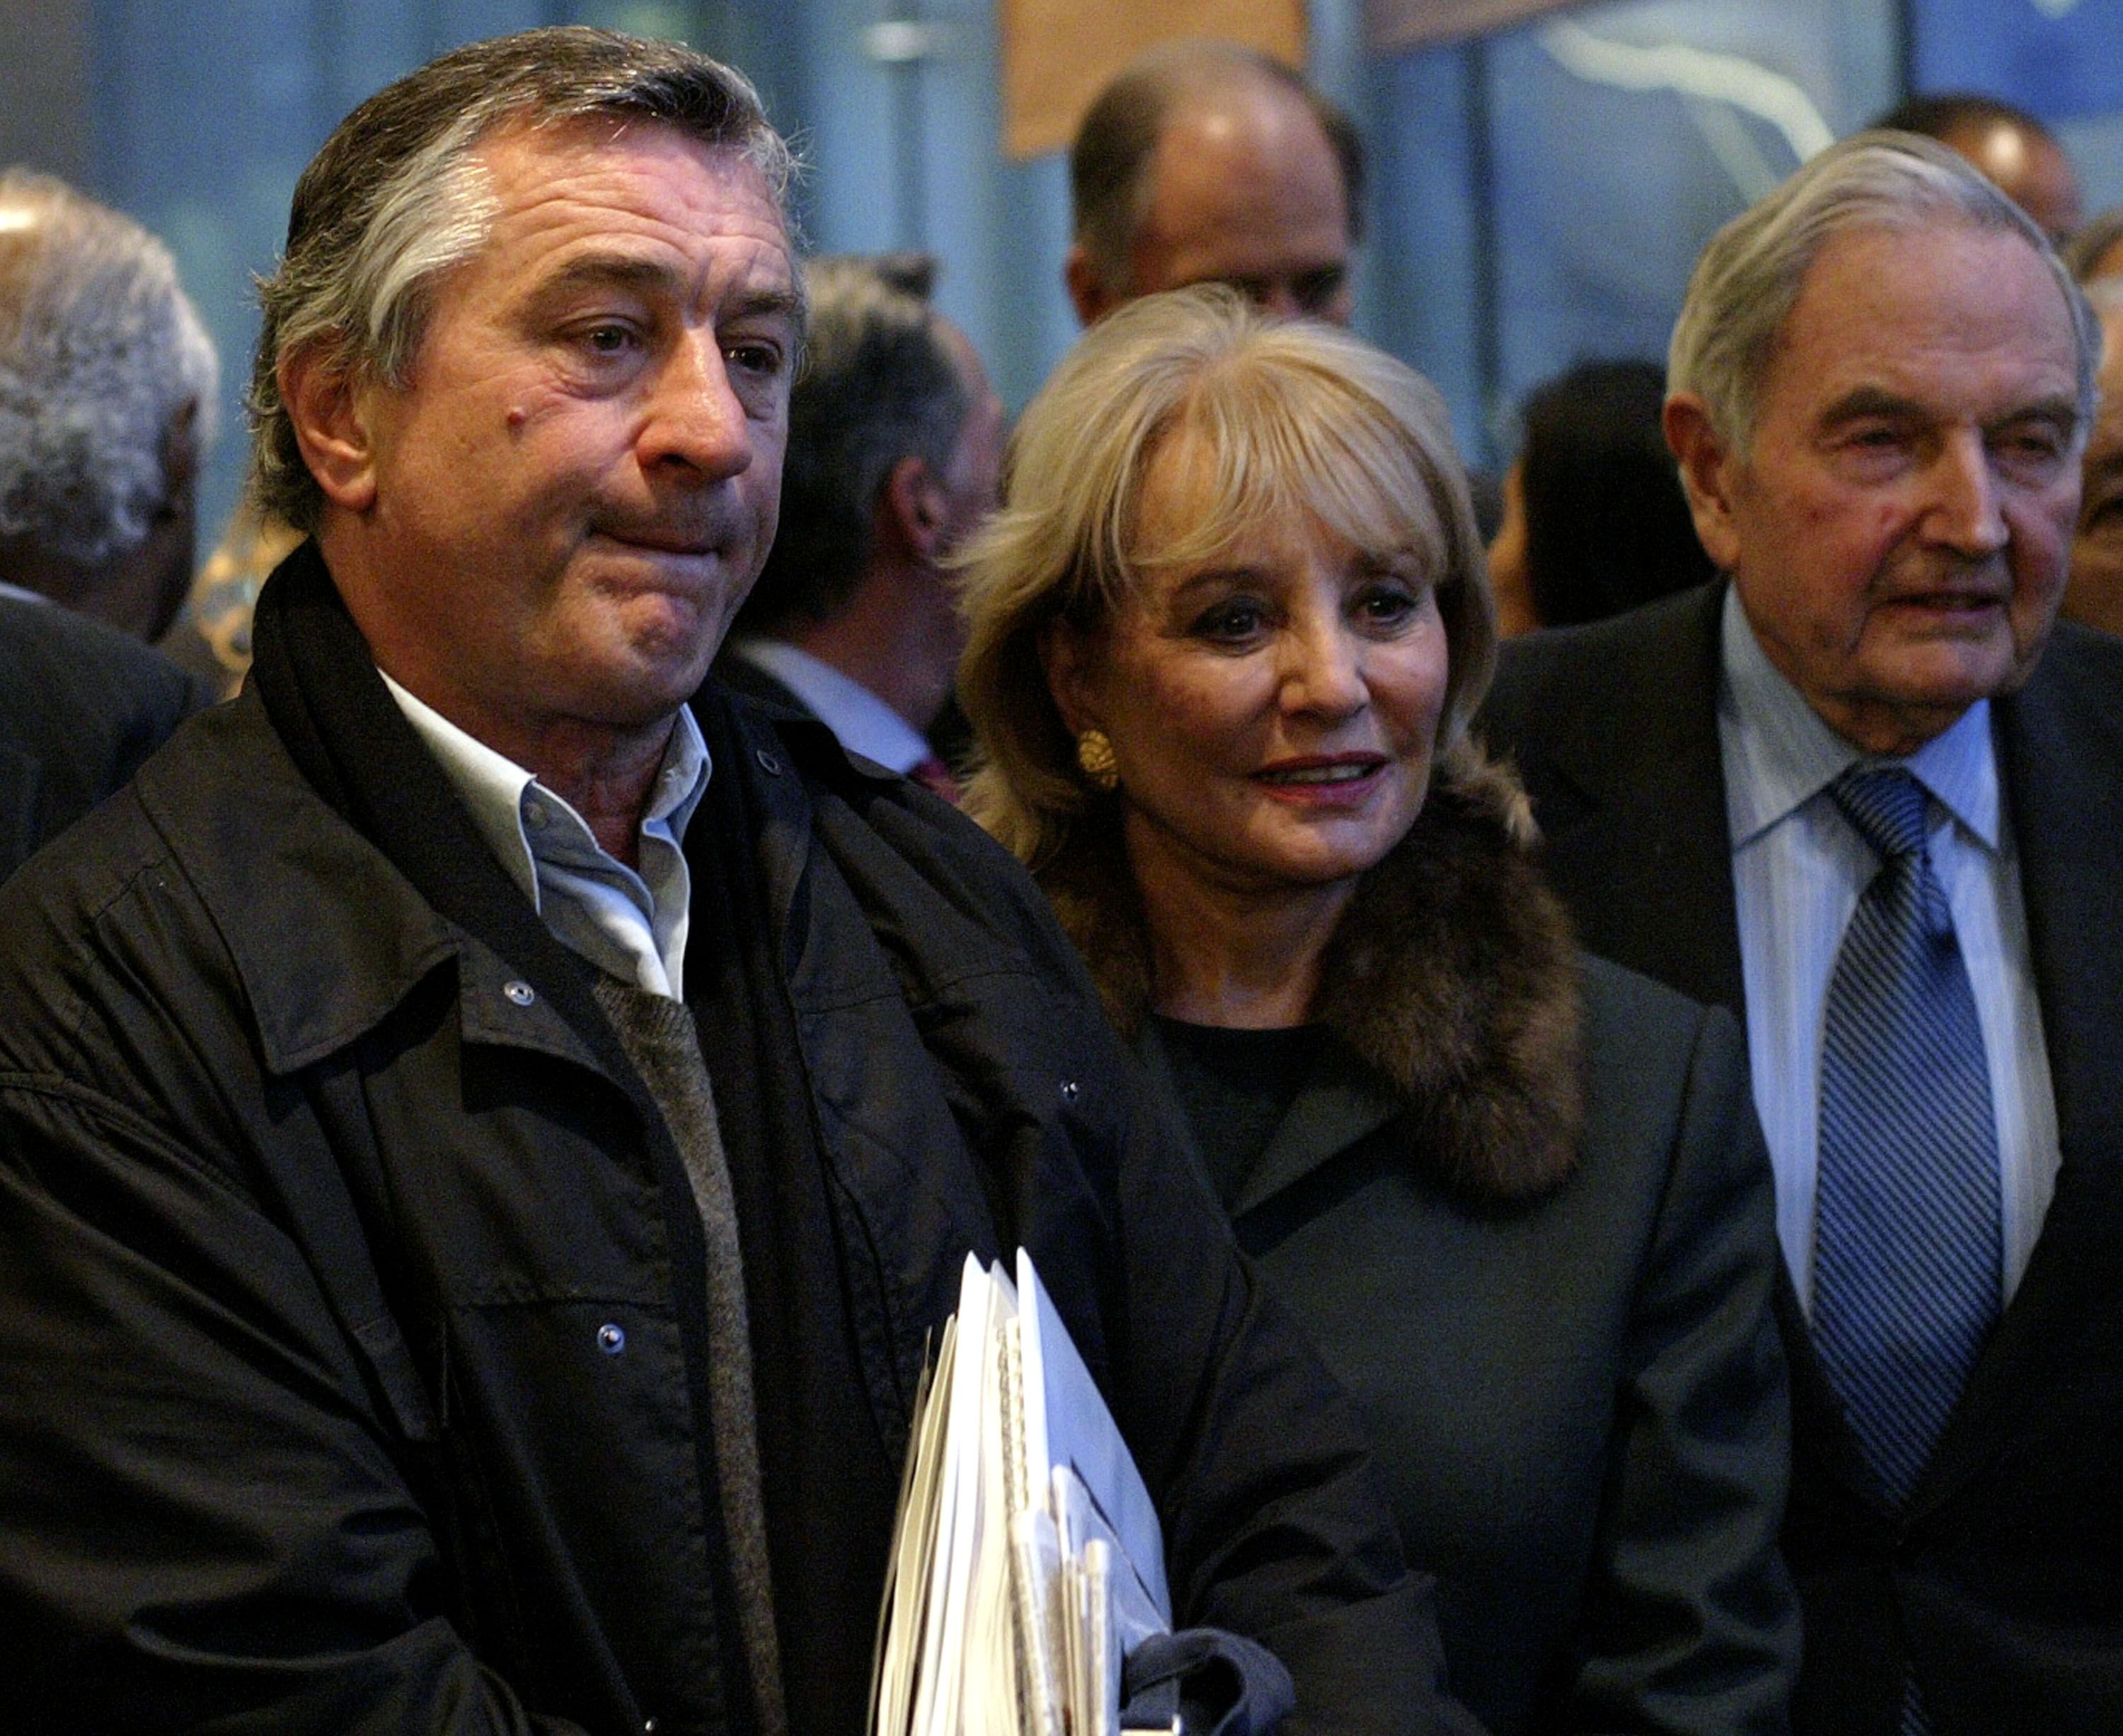  actor Robert DiNiro; Barbara Walters; and David Rockefeller, former chairman of Chase Manhattan Bank, attend a news conference.